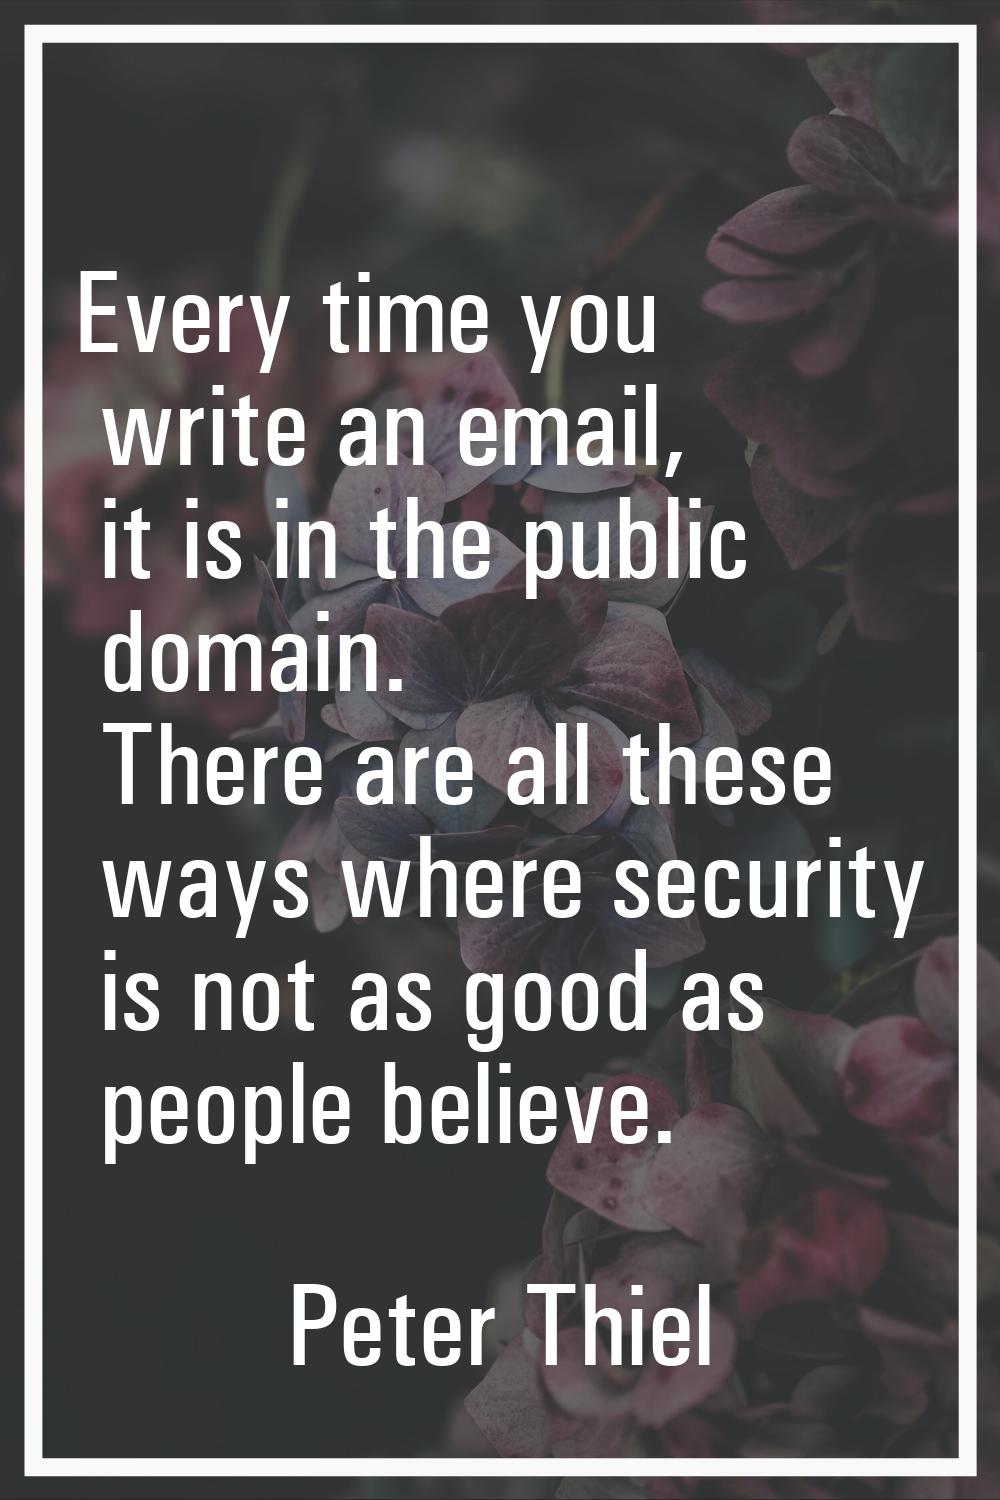 Every time you write an email, it is in the public domain. There are all these ways where security 